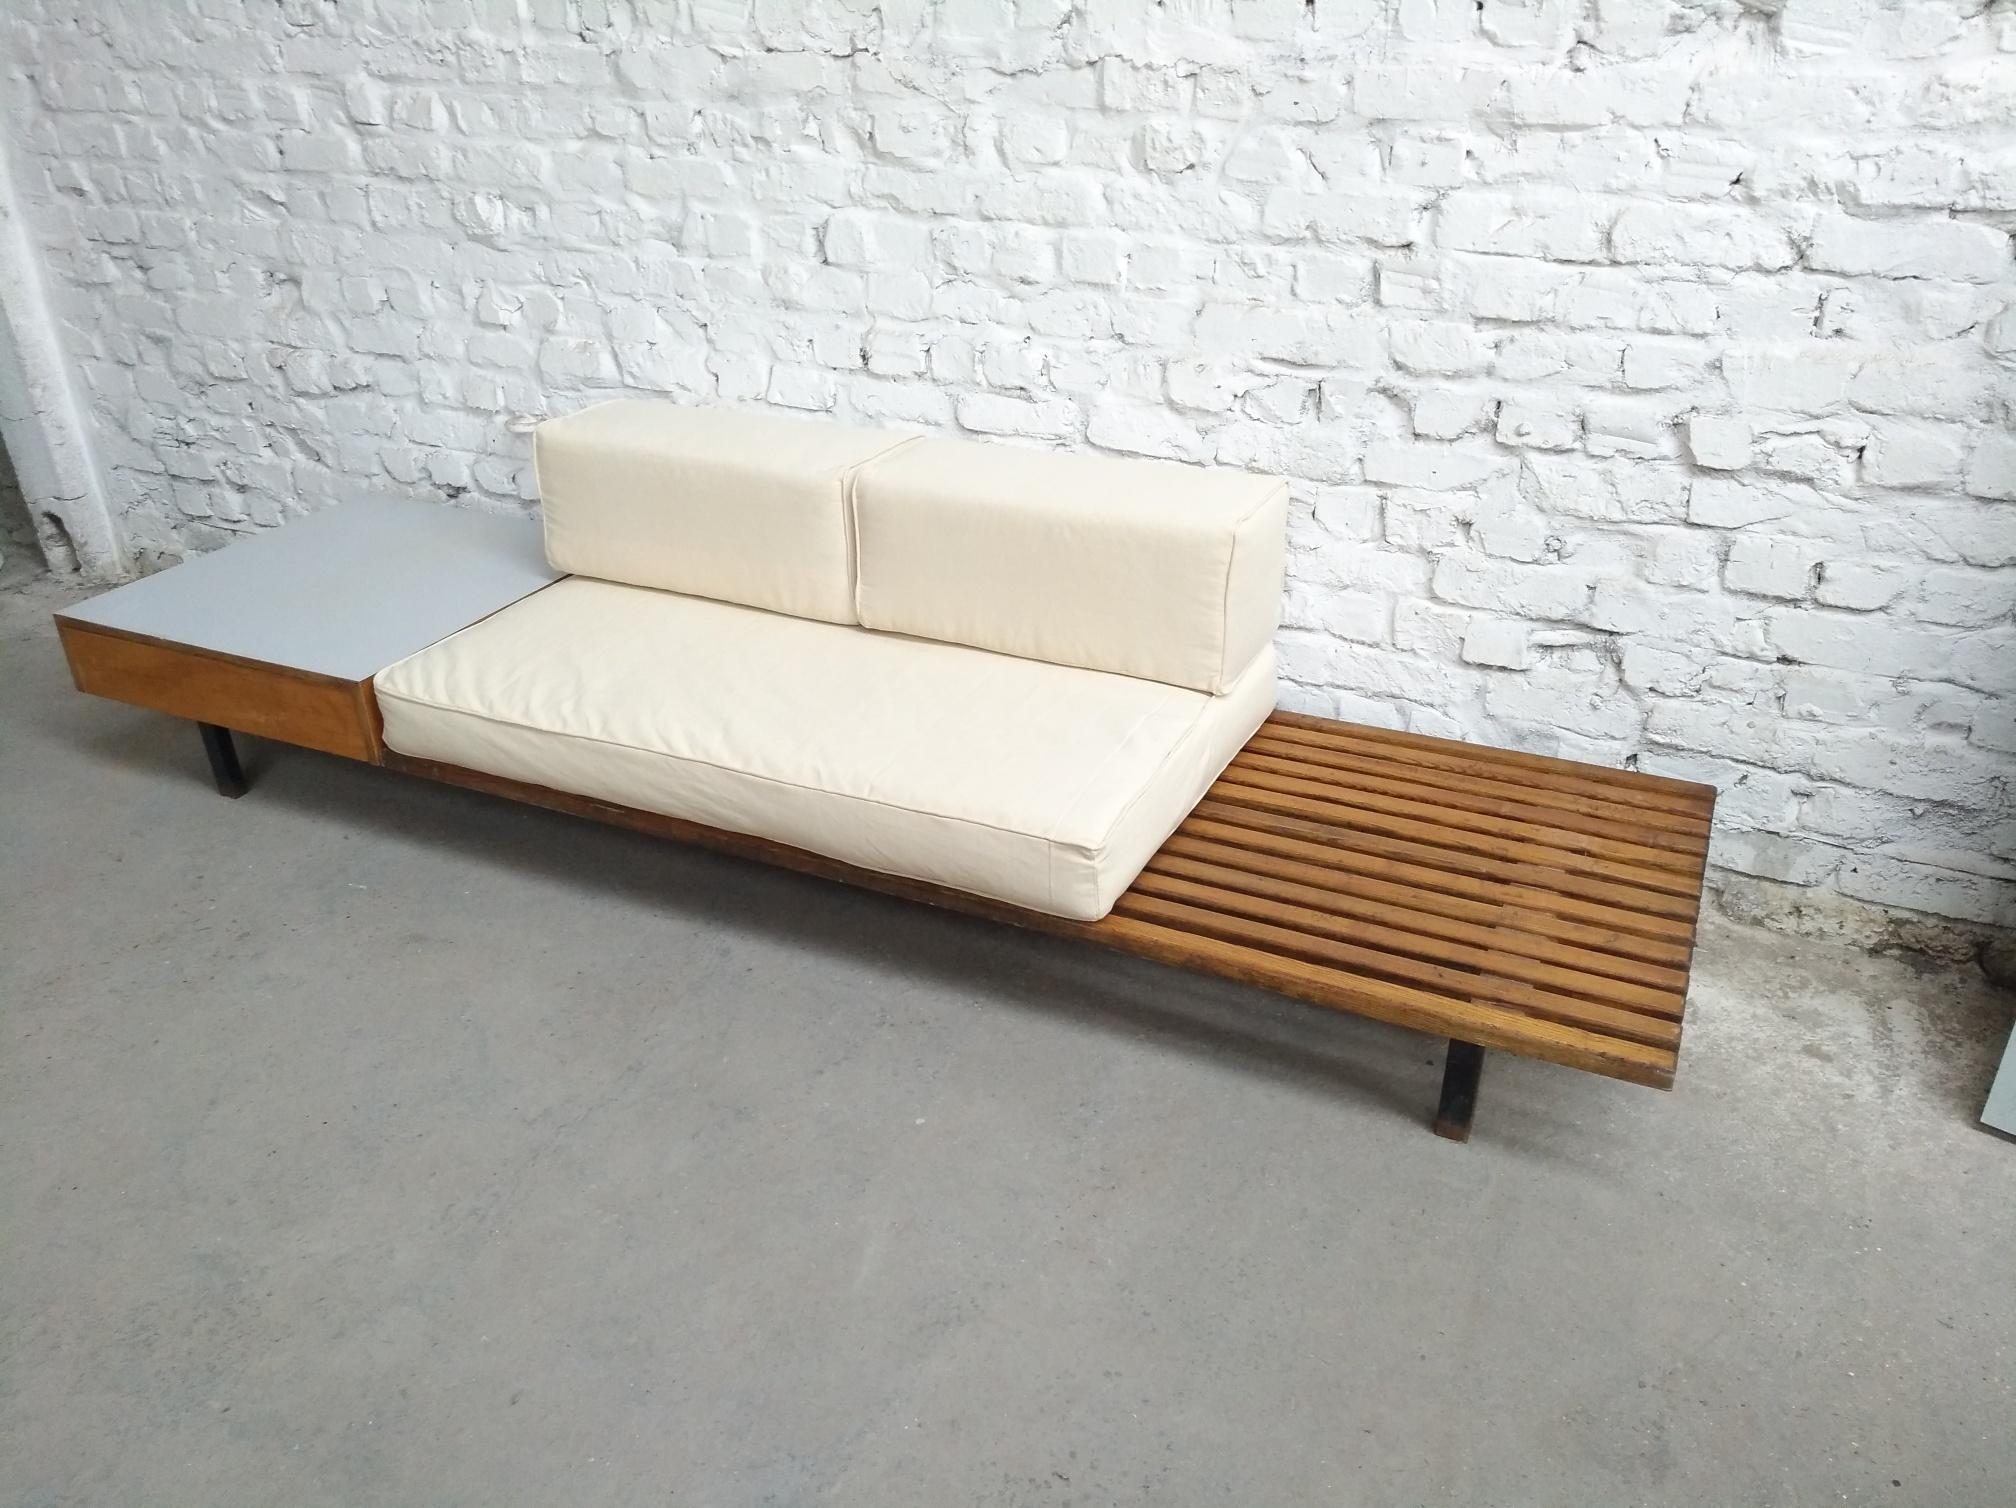 Charlotte Perriand Cansado bench daybed Steph Simon France 1959 For Sale 1